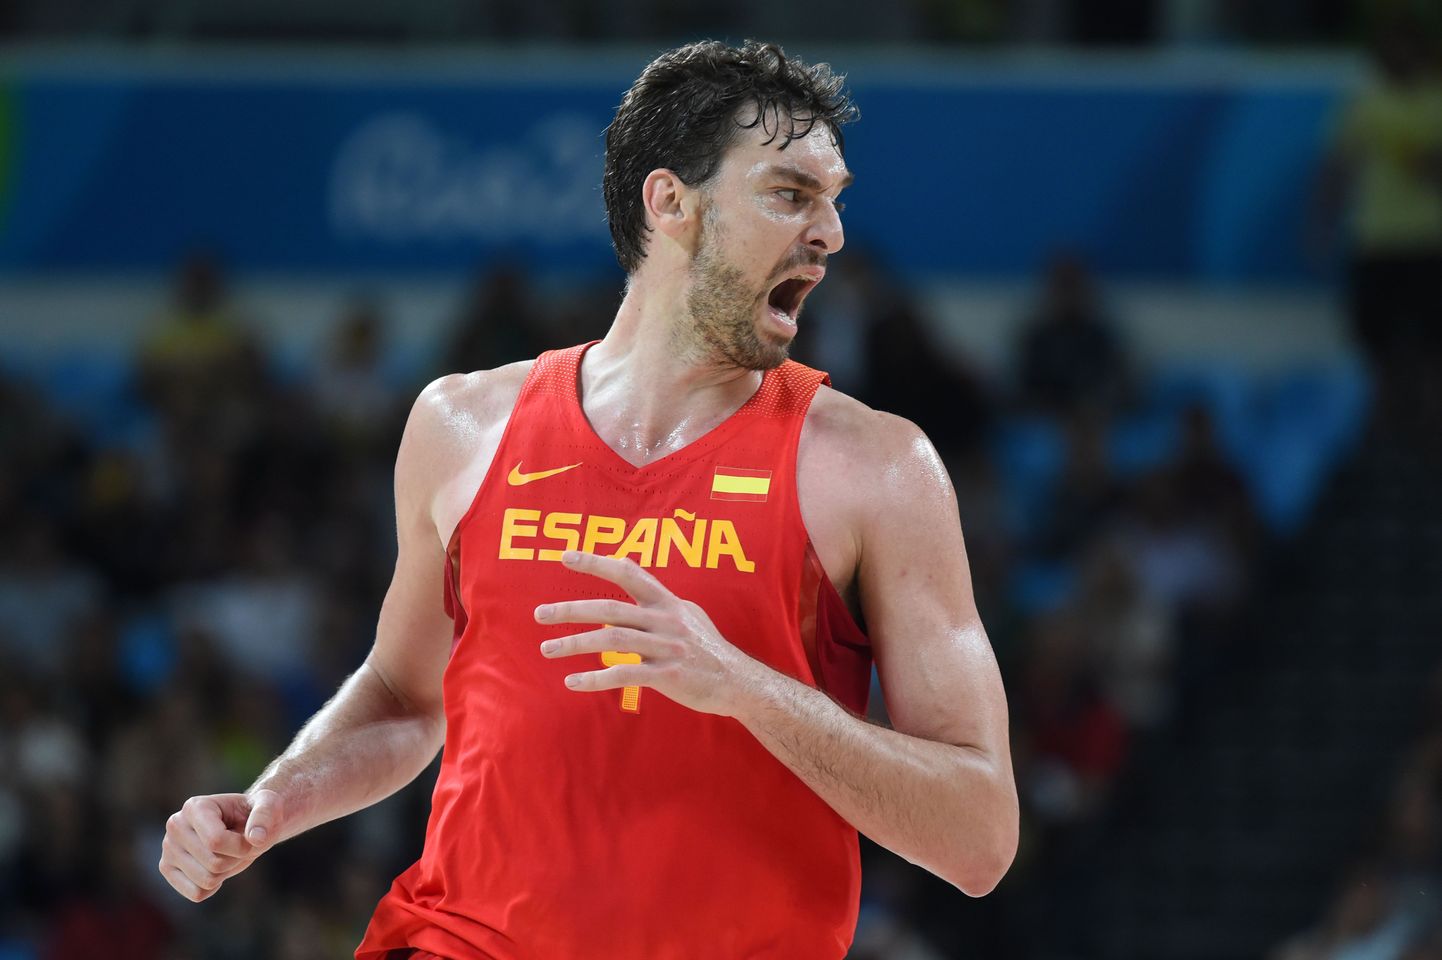 Spain's centre Pau Gasol reacts during a Men's Bronze medal basketball match between Australia and Spain at the Carioca Arena 1 in Rio de Janeiro on August 21, 2016 during the Rio 2016 Olympic Games. / AFP PHOTO / Mark RALSTON